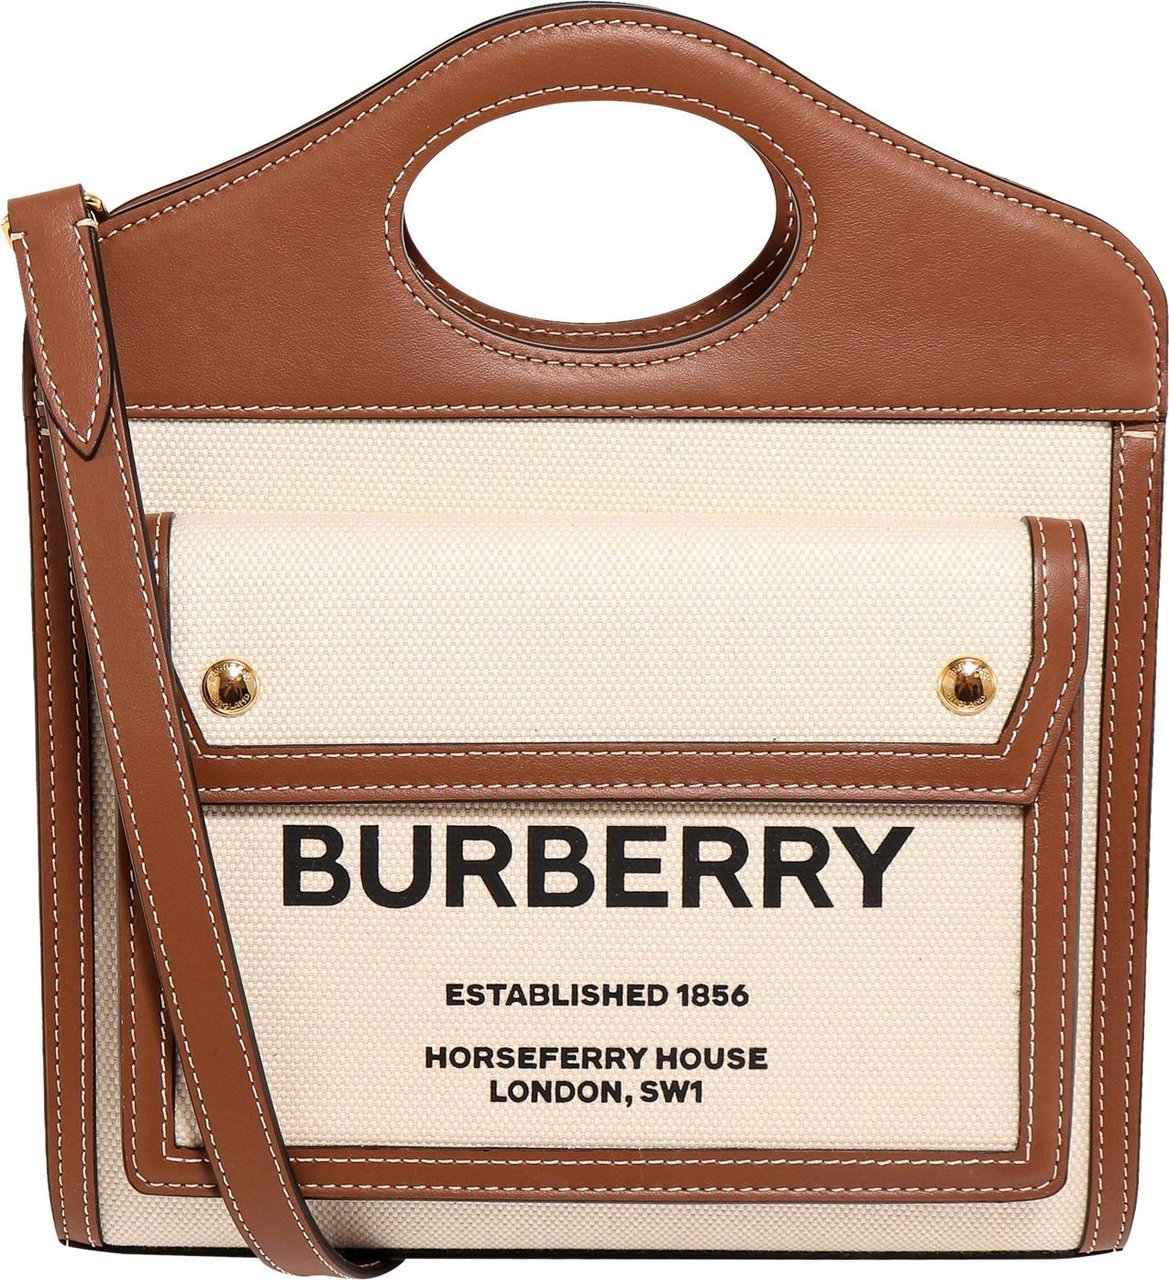 Burberry Canvas and leather handbag Beige